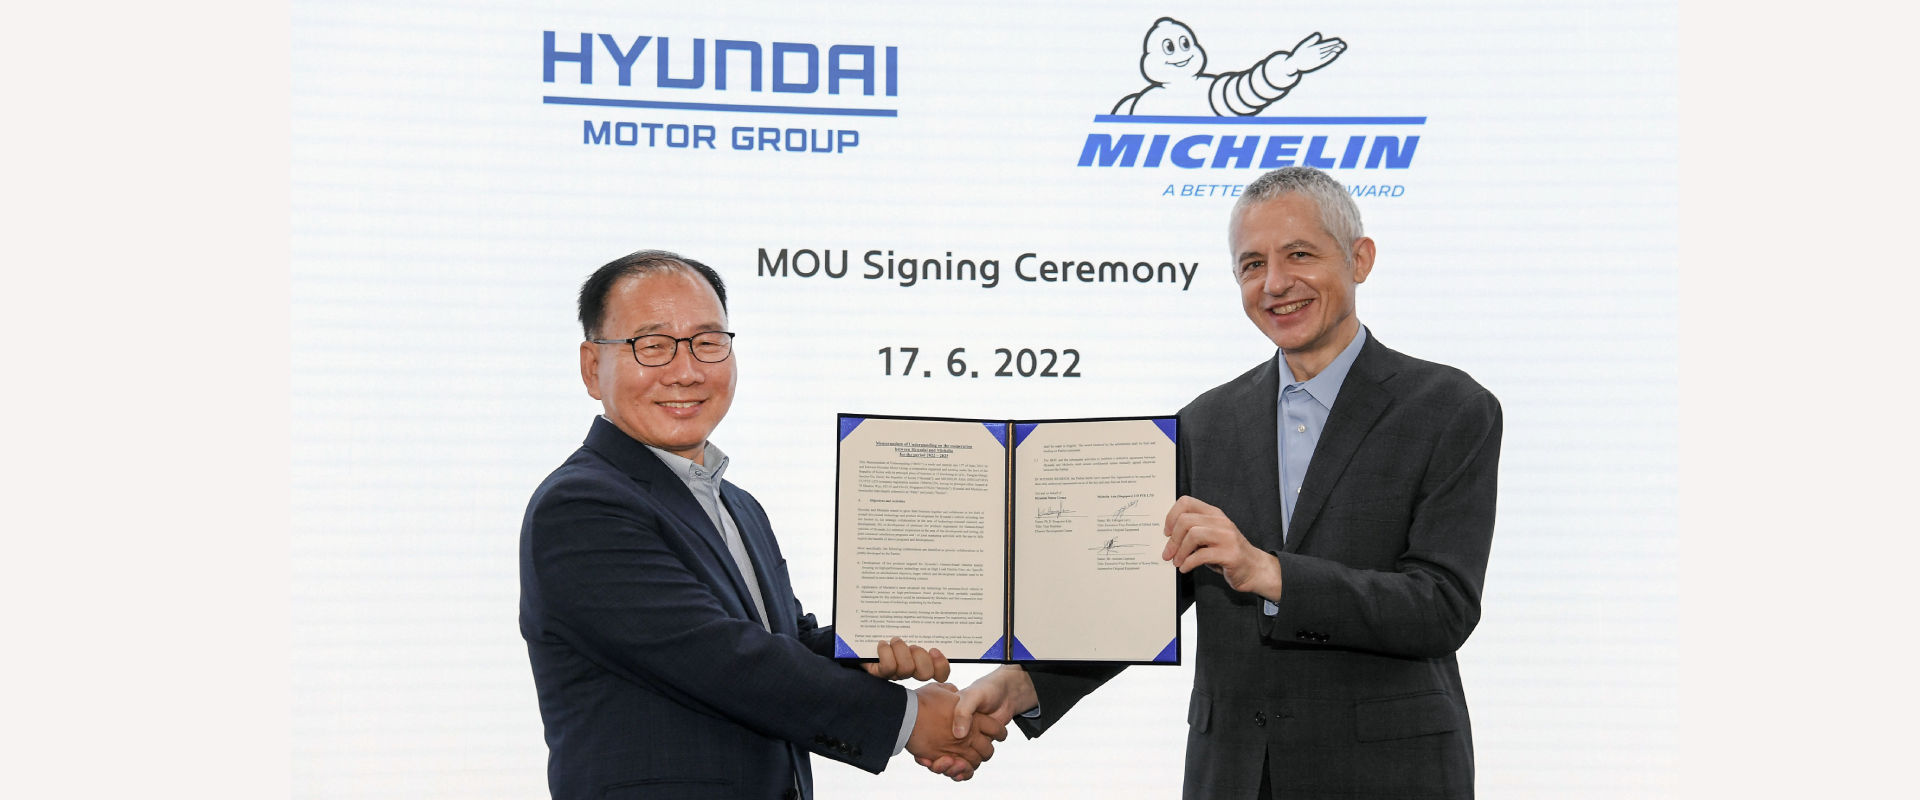 HMG announced the signing of a memorandum of understanding (MoU) with Michelin